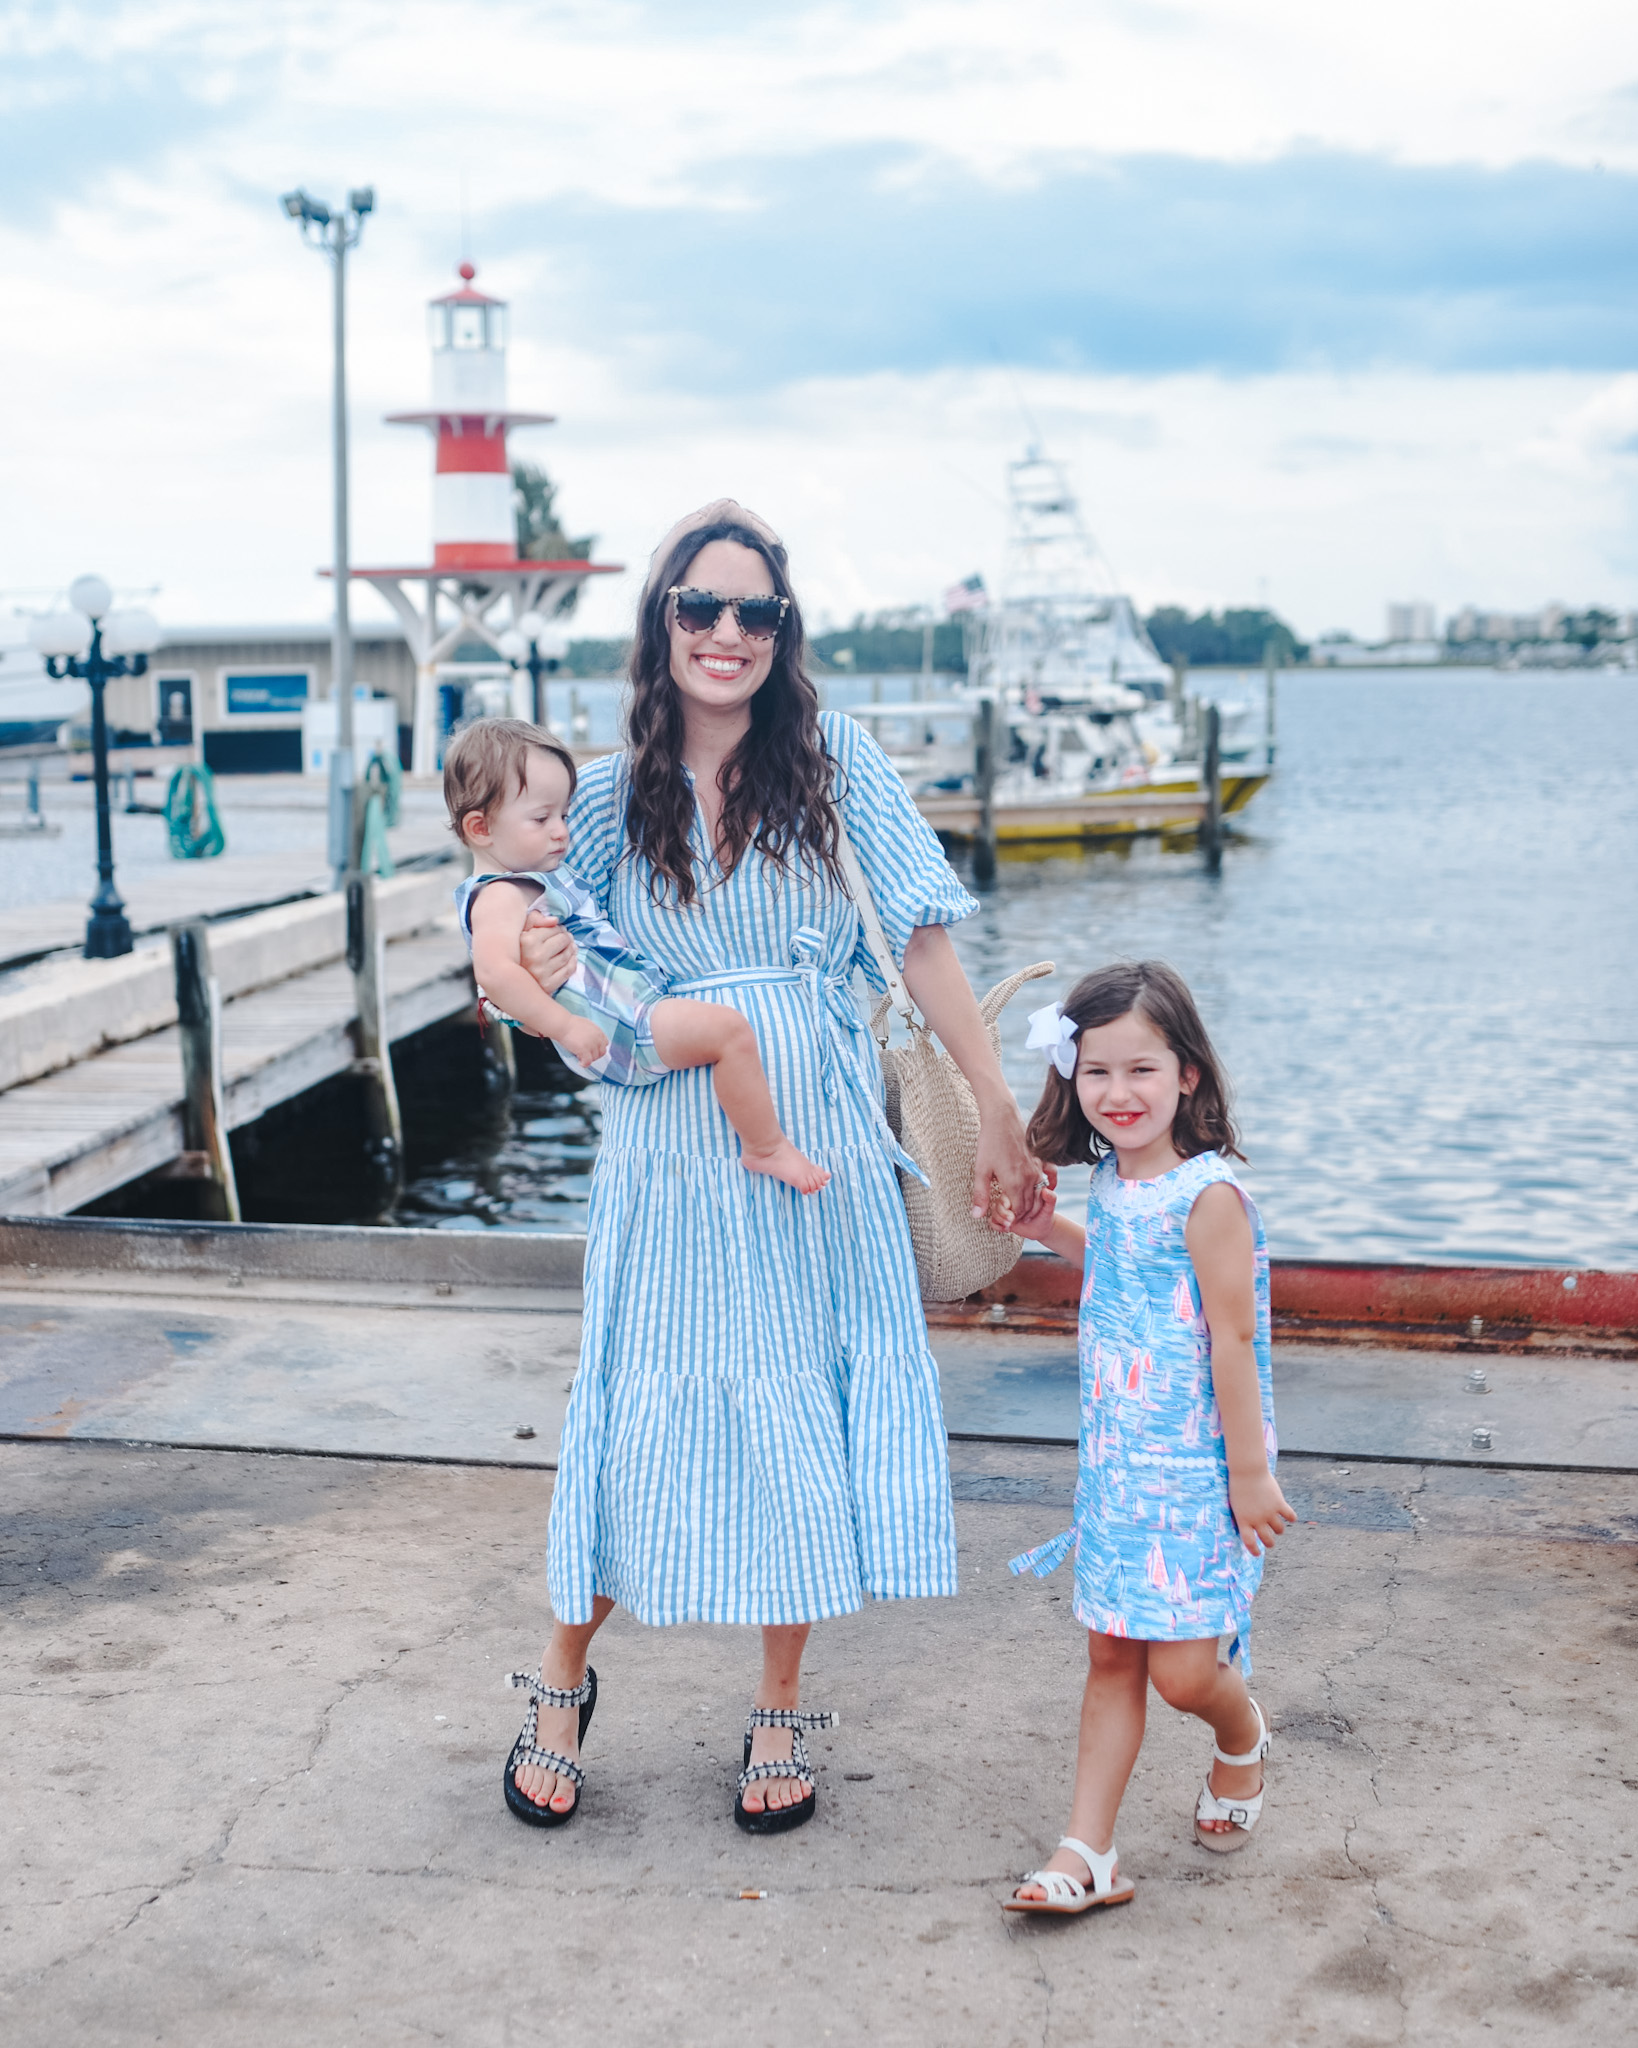 Panama City Beach Attractions by popular Memphis travel blog, Lone Star Looking Glass: image of a mom and her young son and daughter standing together on a dock. 